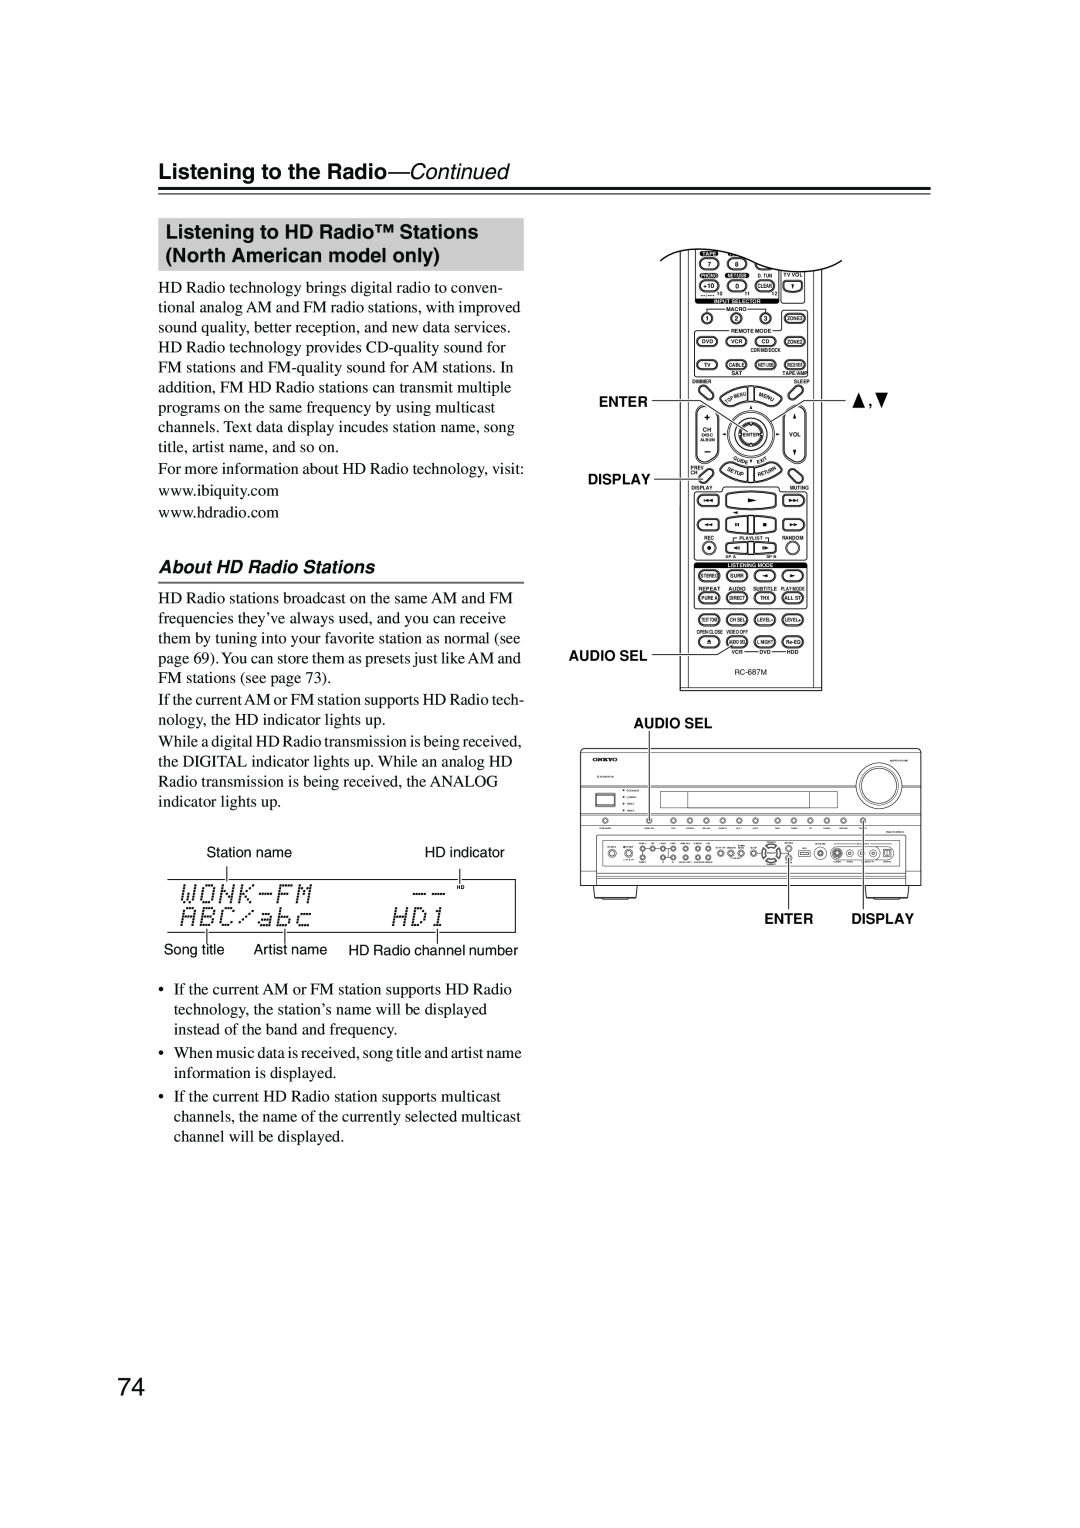 Onkyo TX-NR905 instruction manual About HD Radio Stations, Listening to the Radio—Continued 